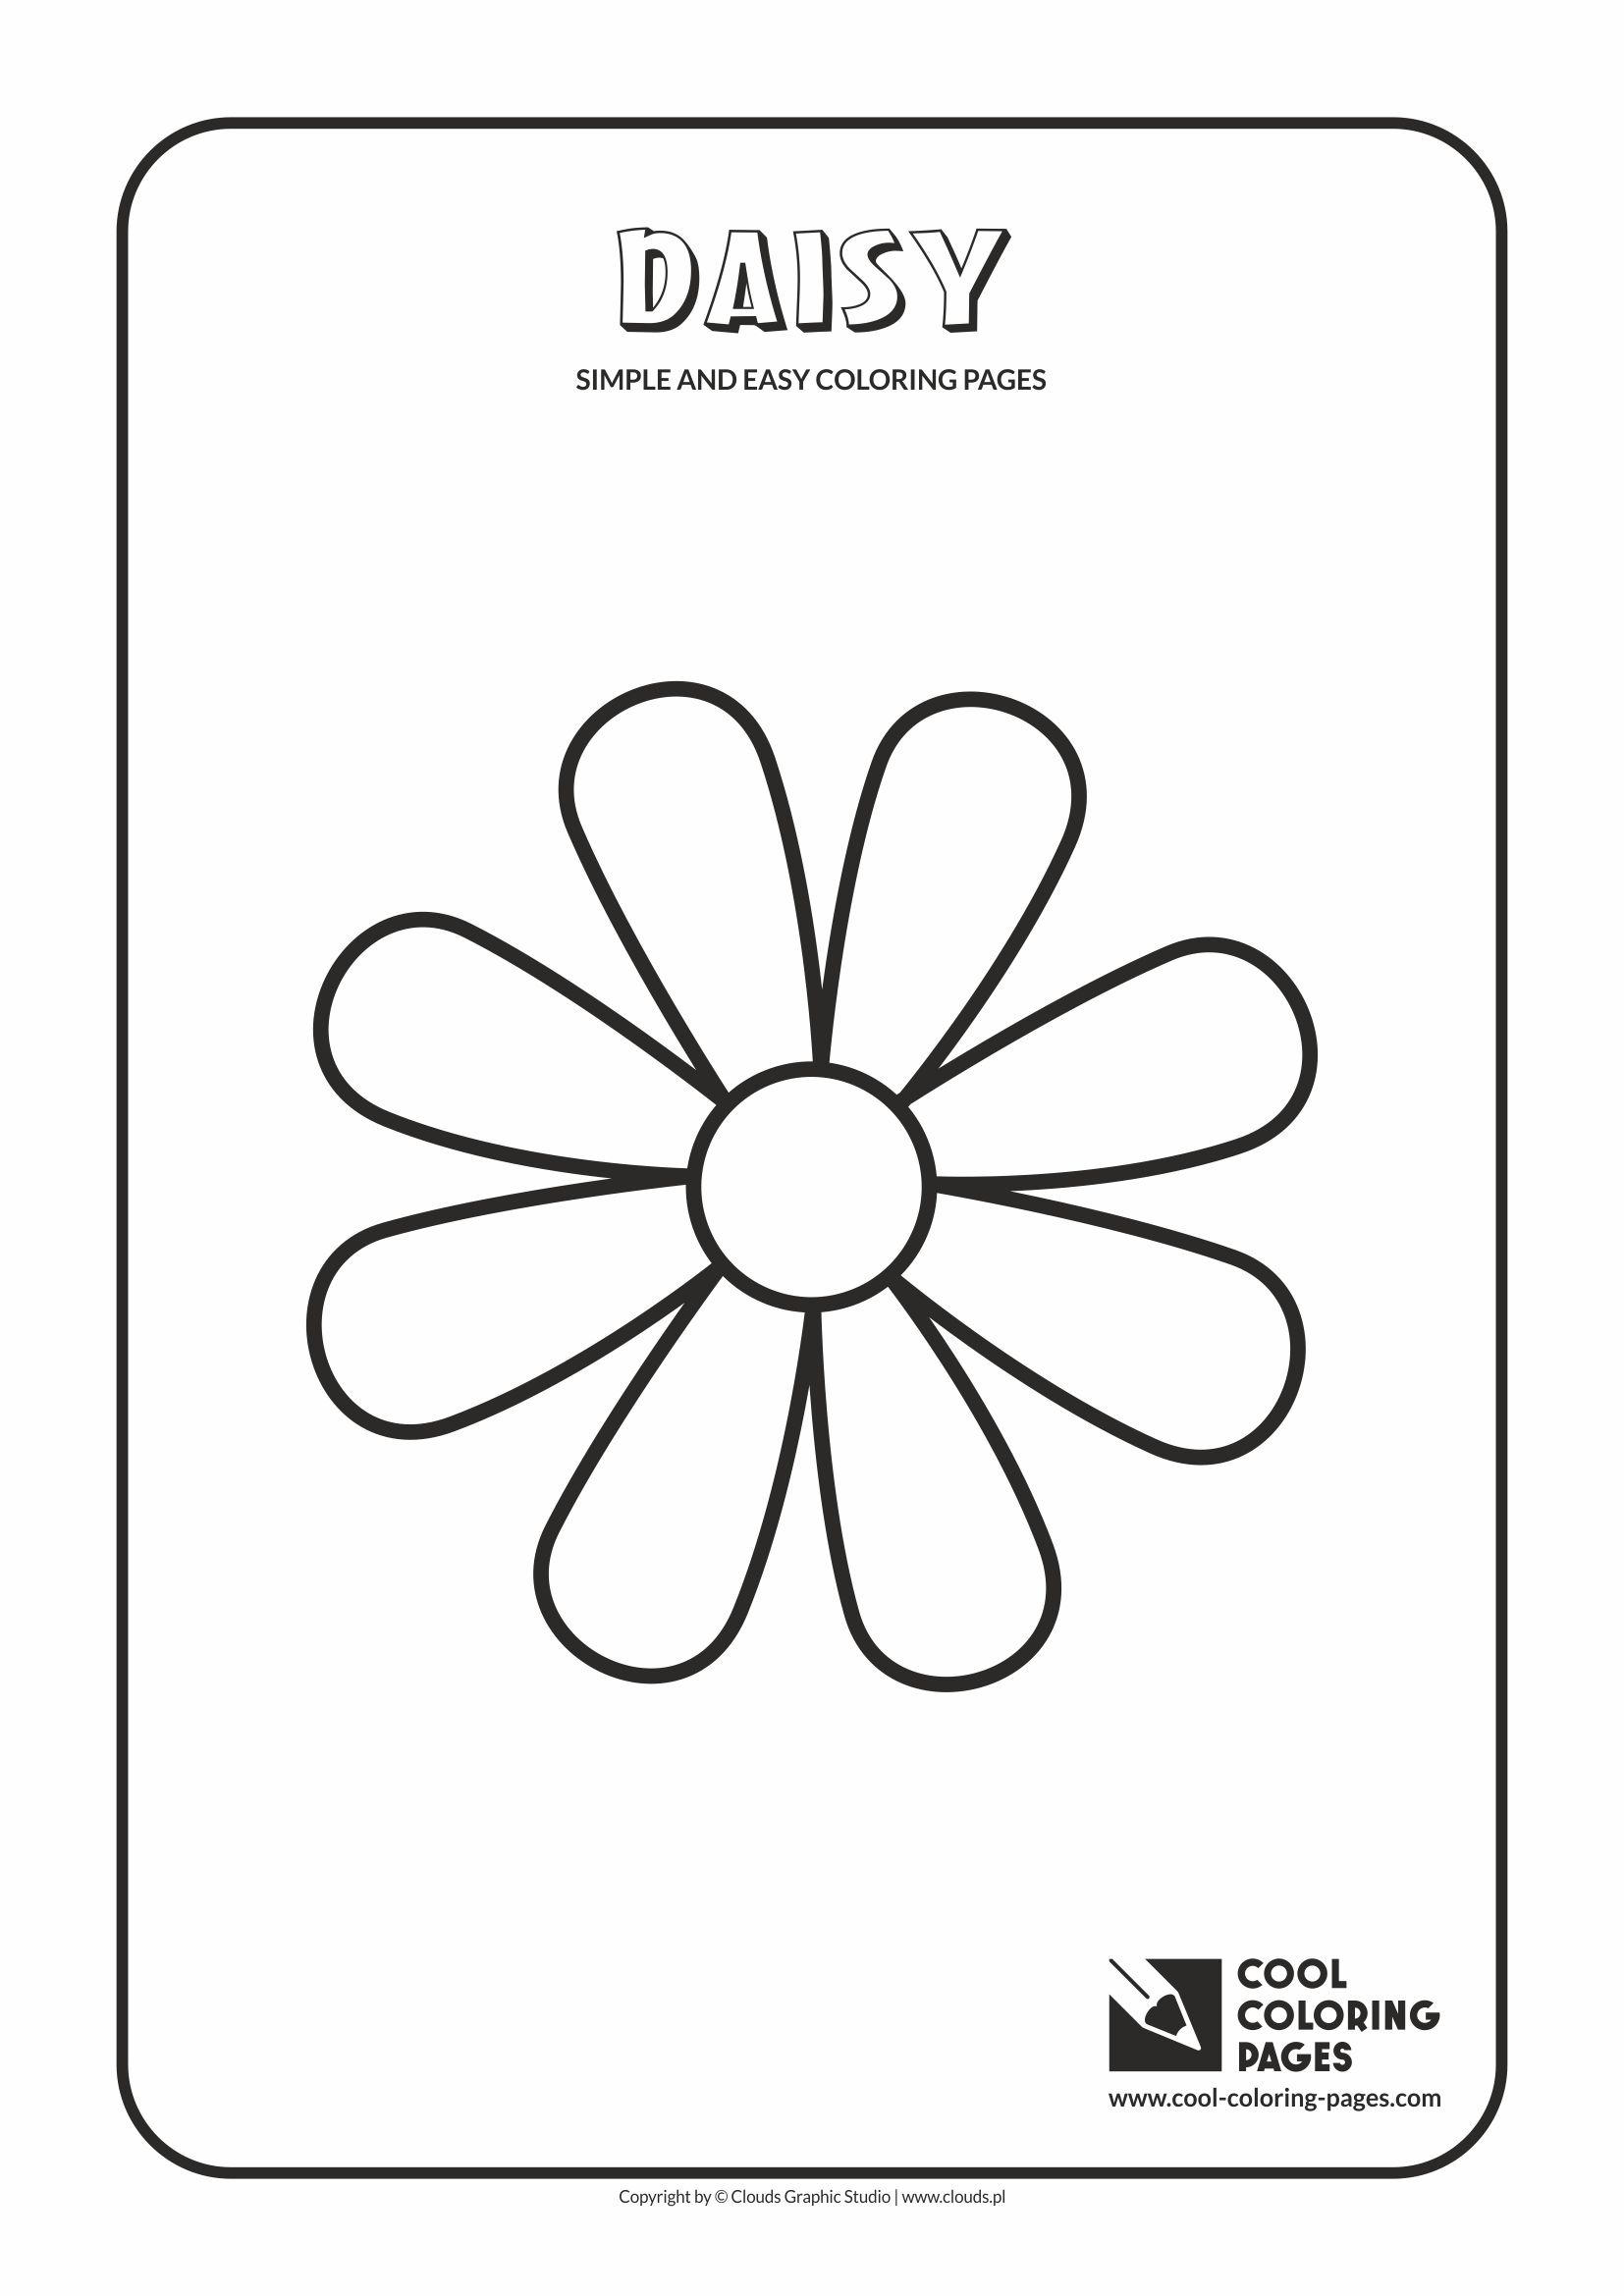 Simple and easy coloring pages for toddlers - Daisy